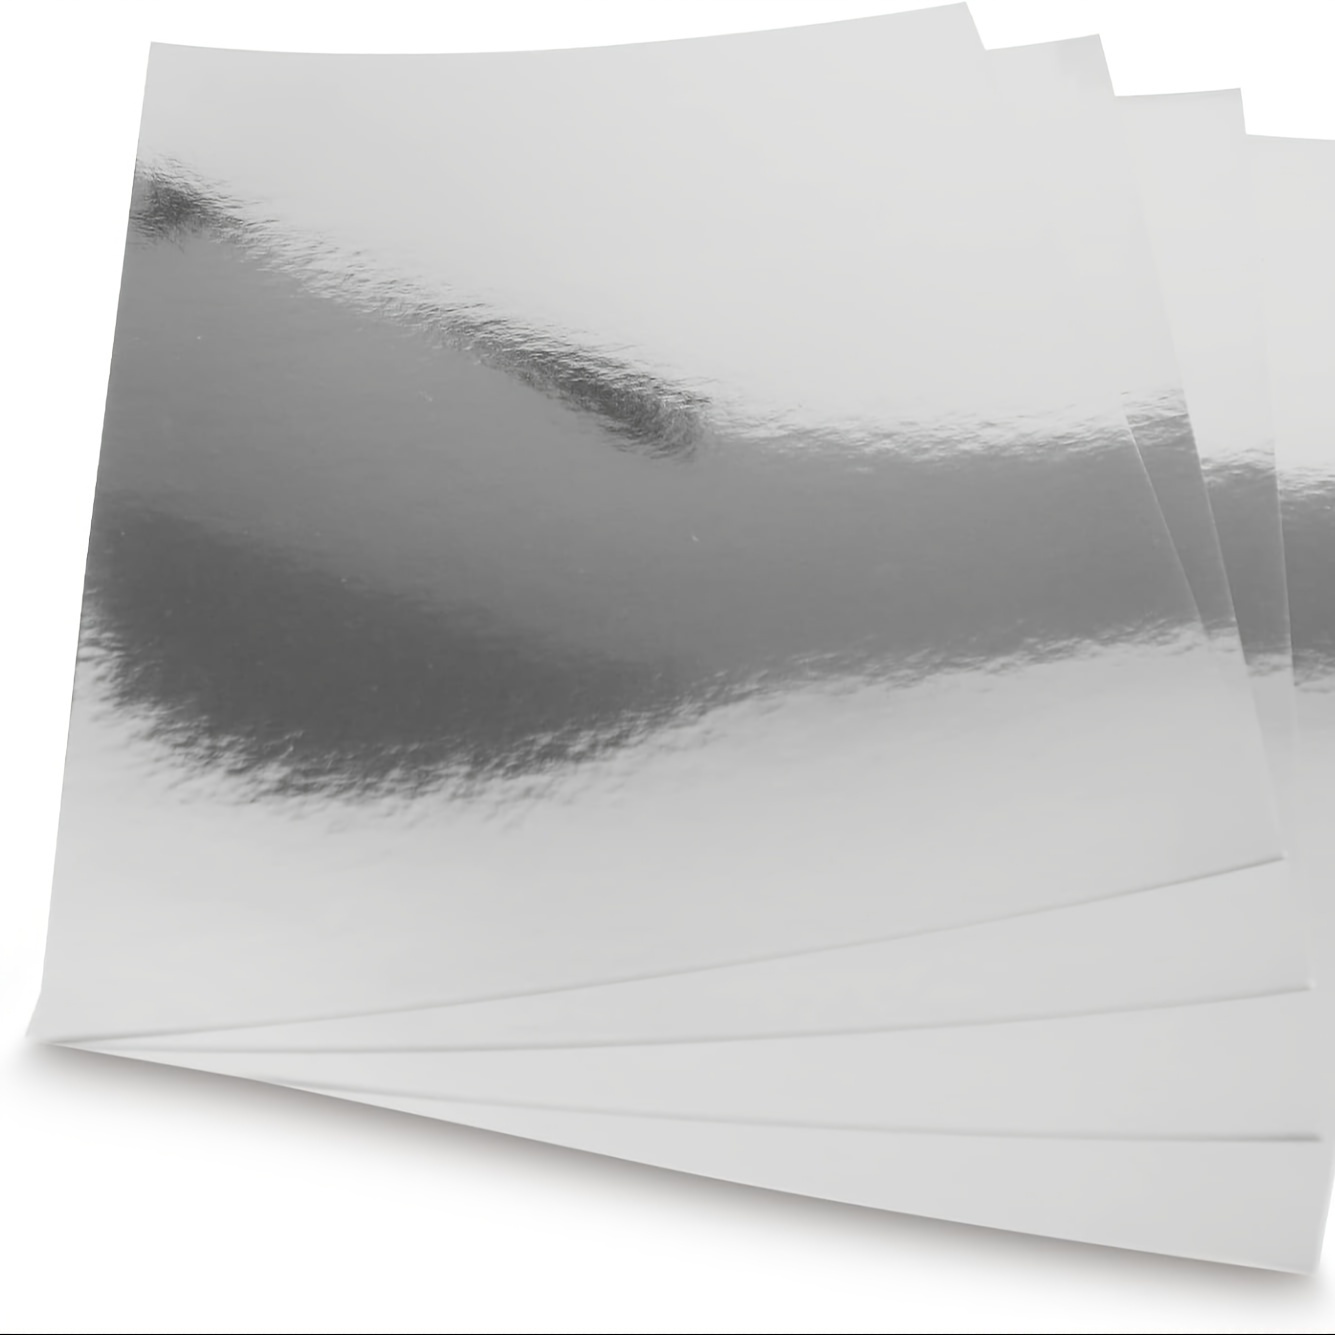 

10sheets Metallic Golden Silvery Cardstock Paper, 21x 29.7cm Golden Silvery Paper Foil Board, Mirror Perfect For Crafting, Invitations And Decorations